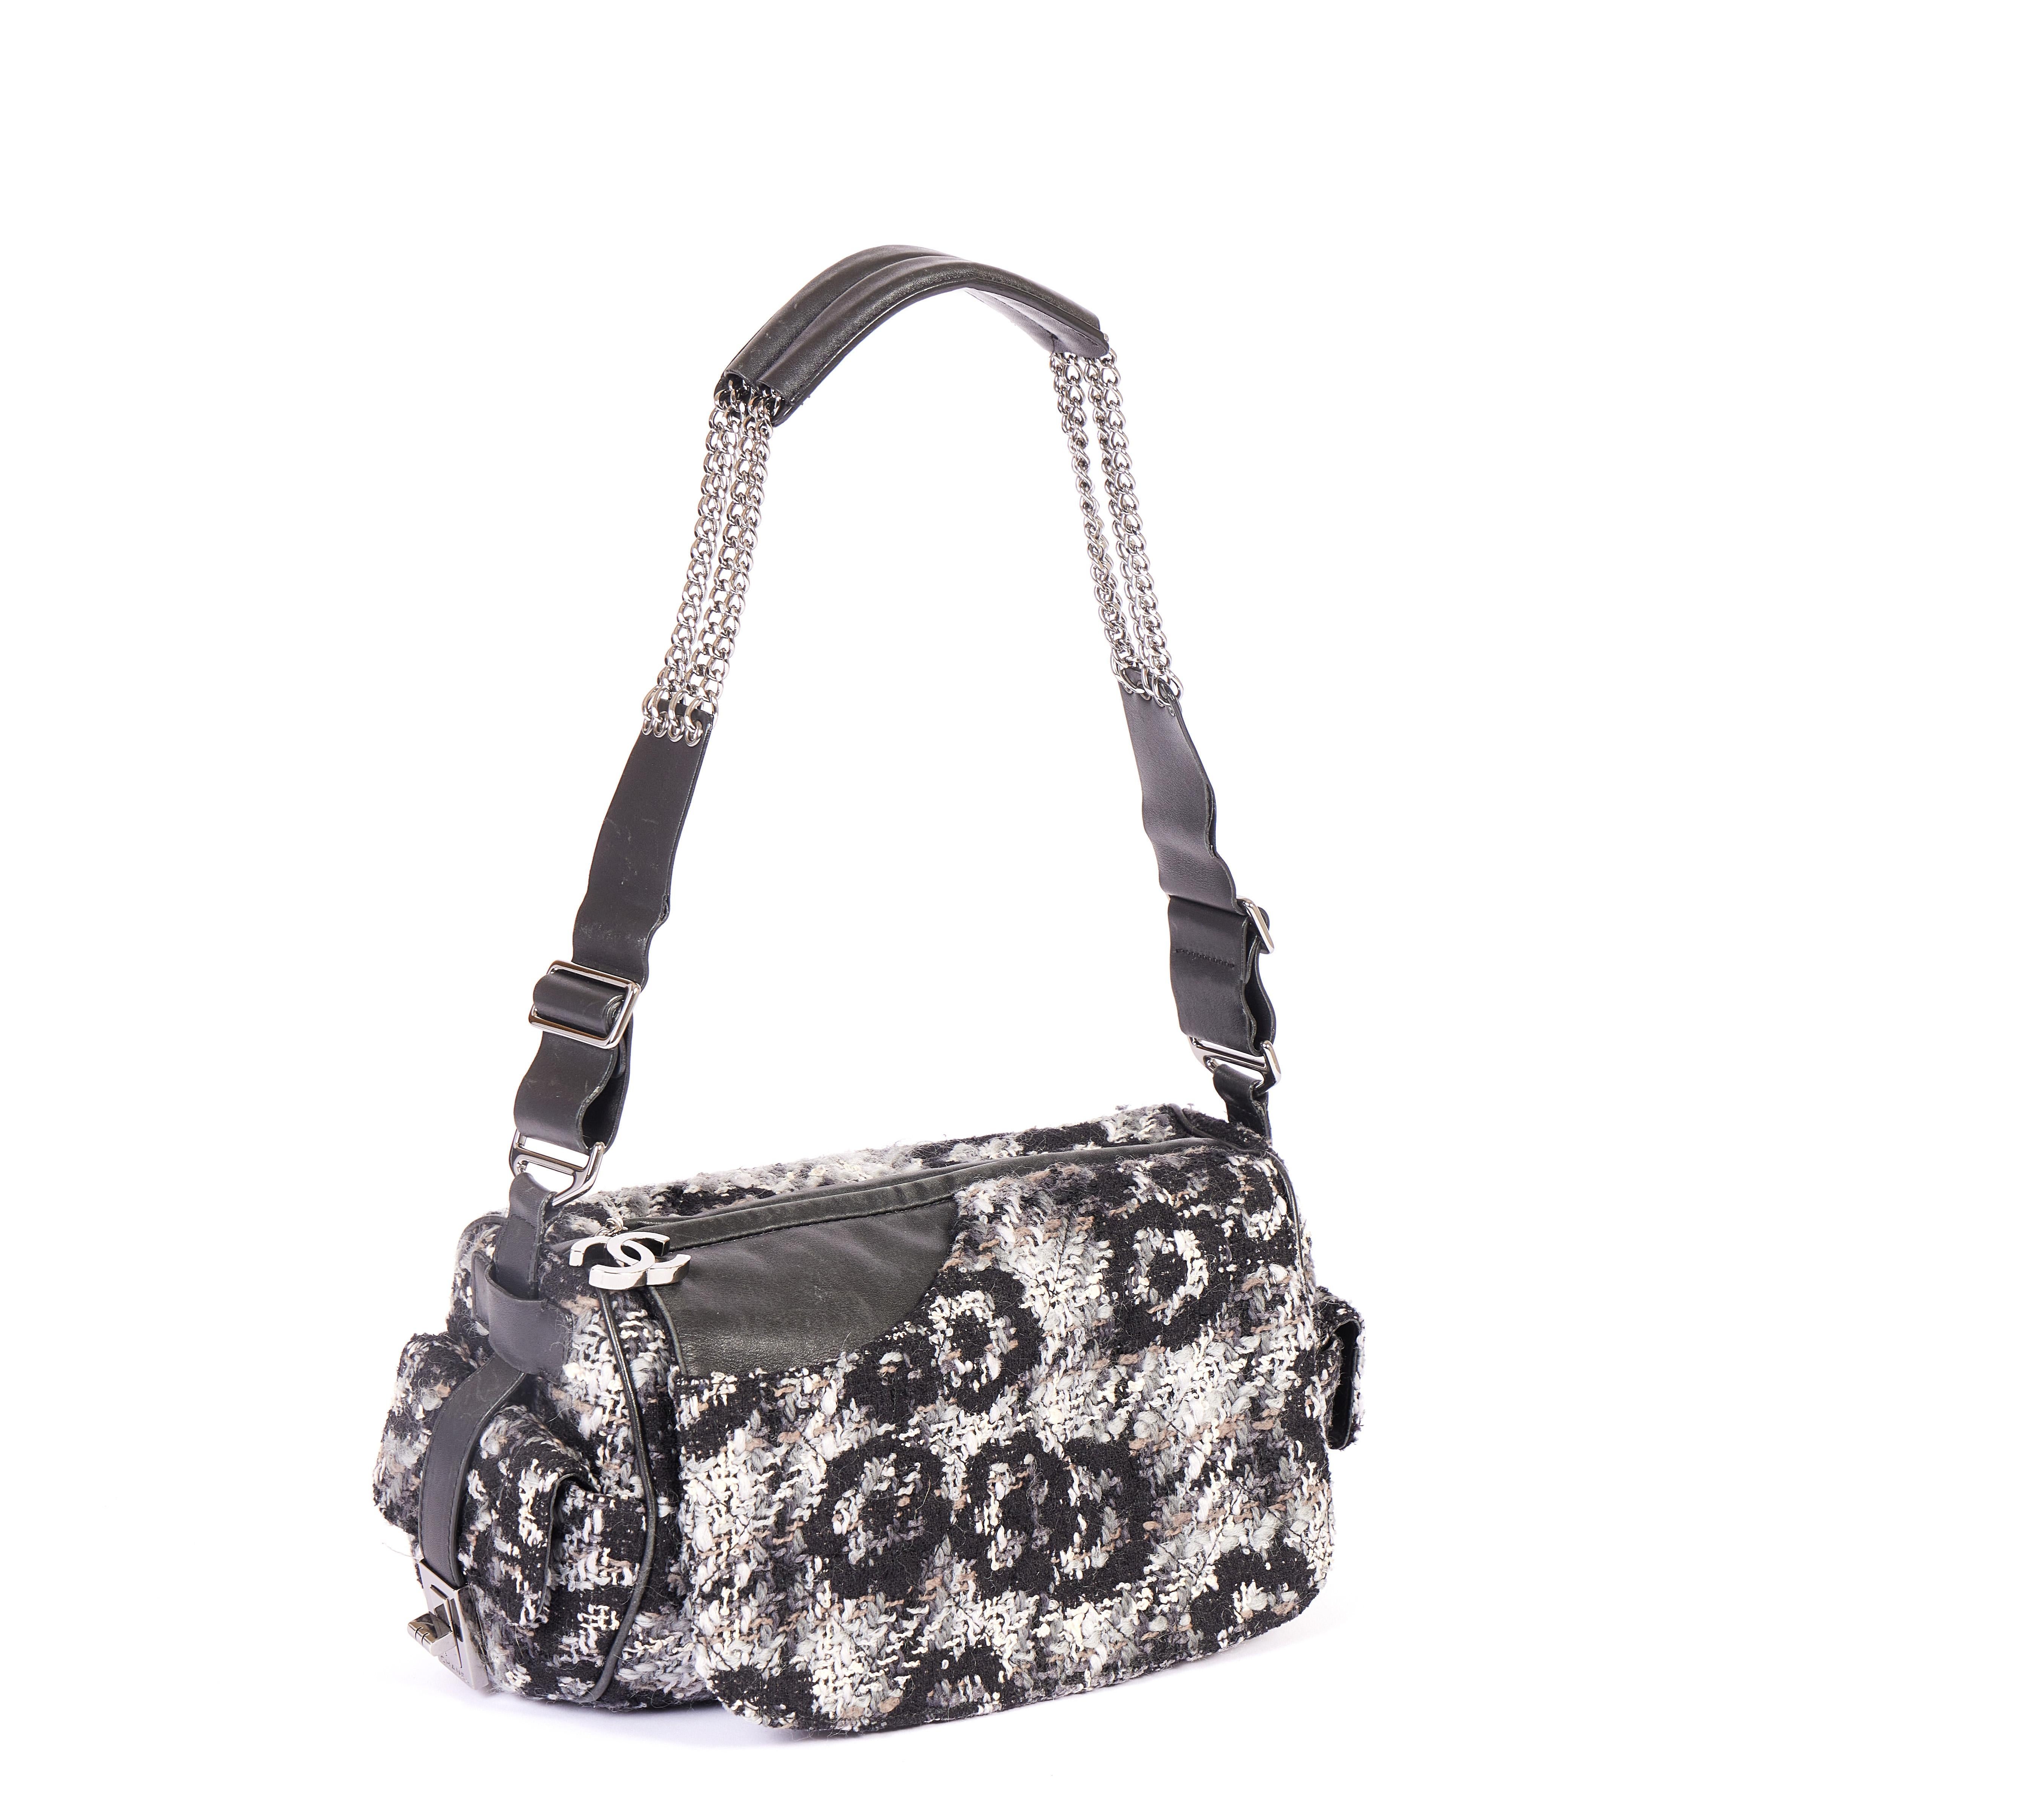 This super cool Chanel Tweed bag comes with a rock'n roll chain made out of super soft leather and multiple thin steal chains. The shoulder drop is 12. The pattern of the Tweed shows flowers and the zipper has the double CC logo. Also it has two